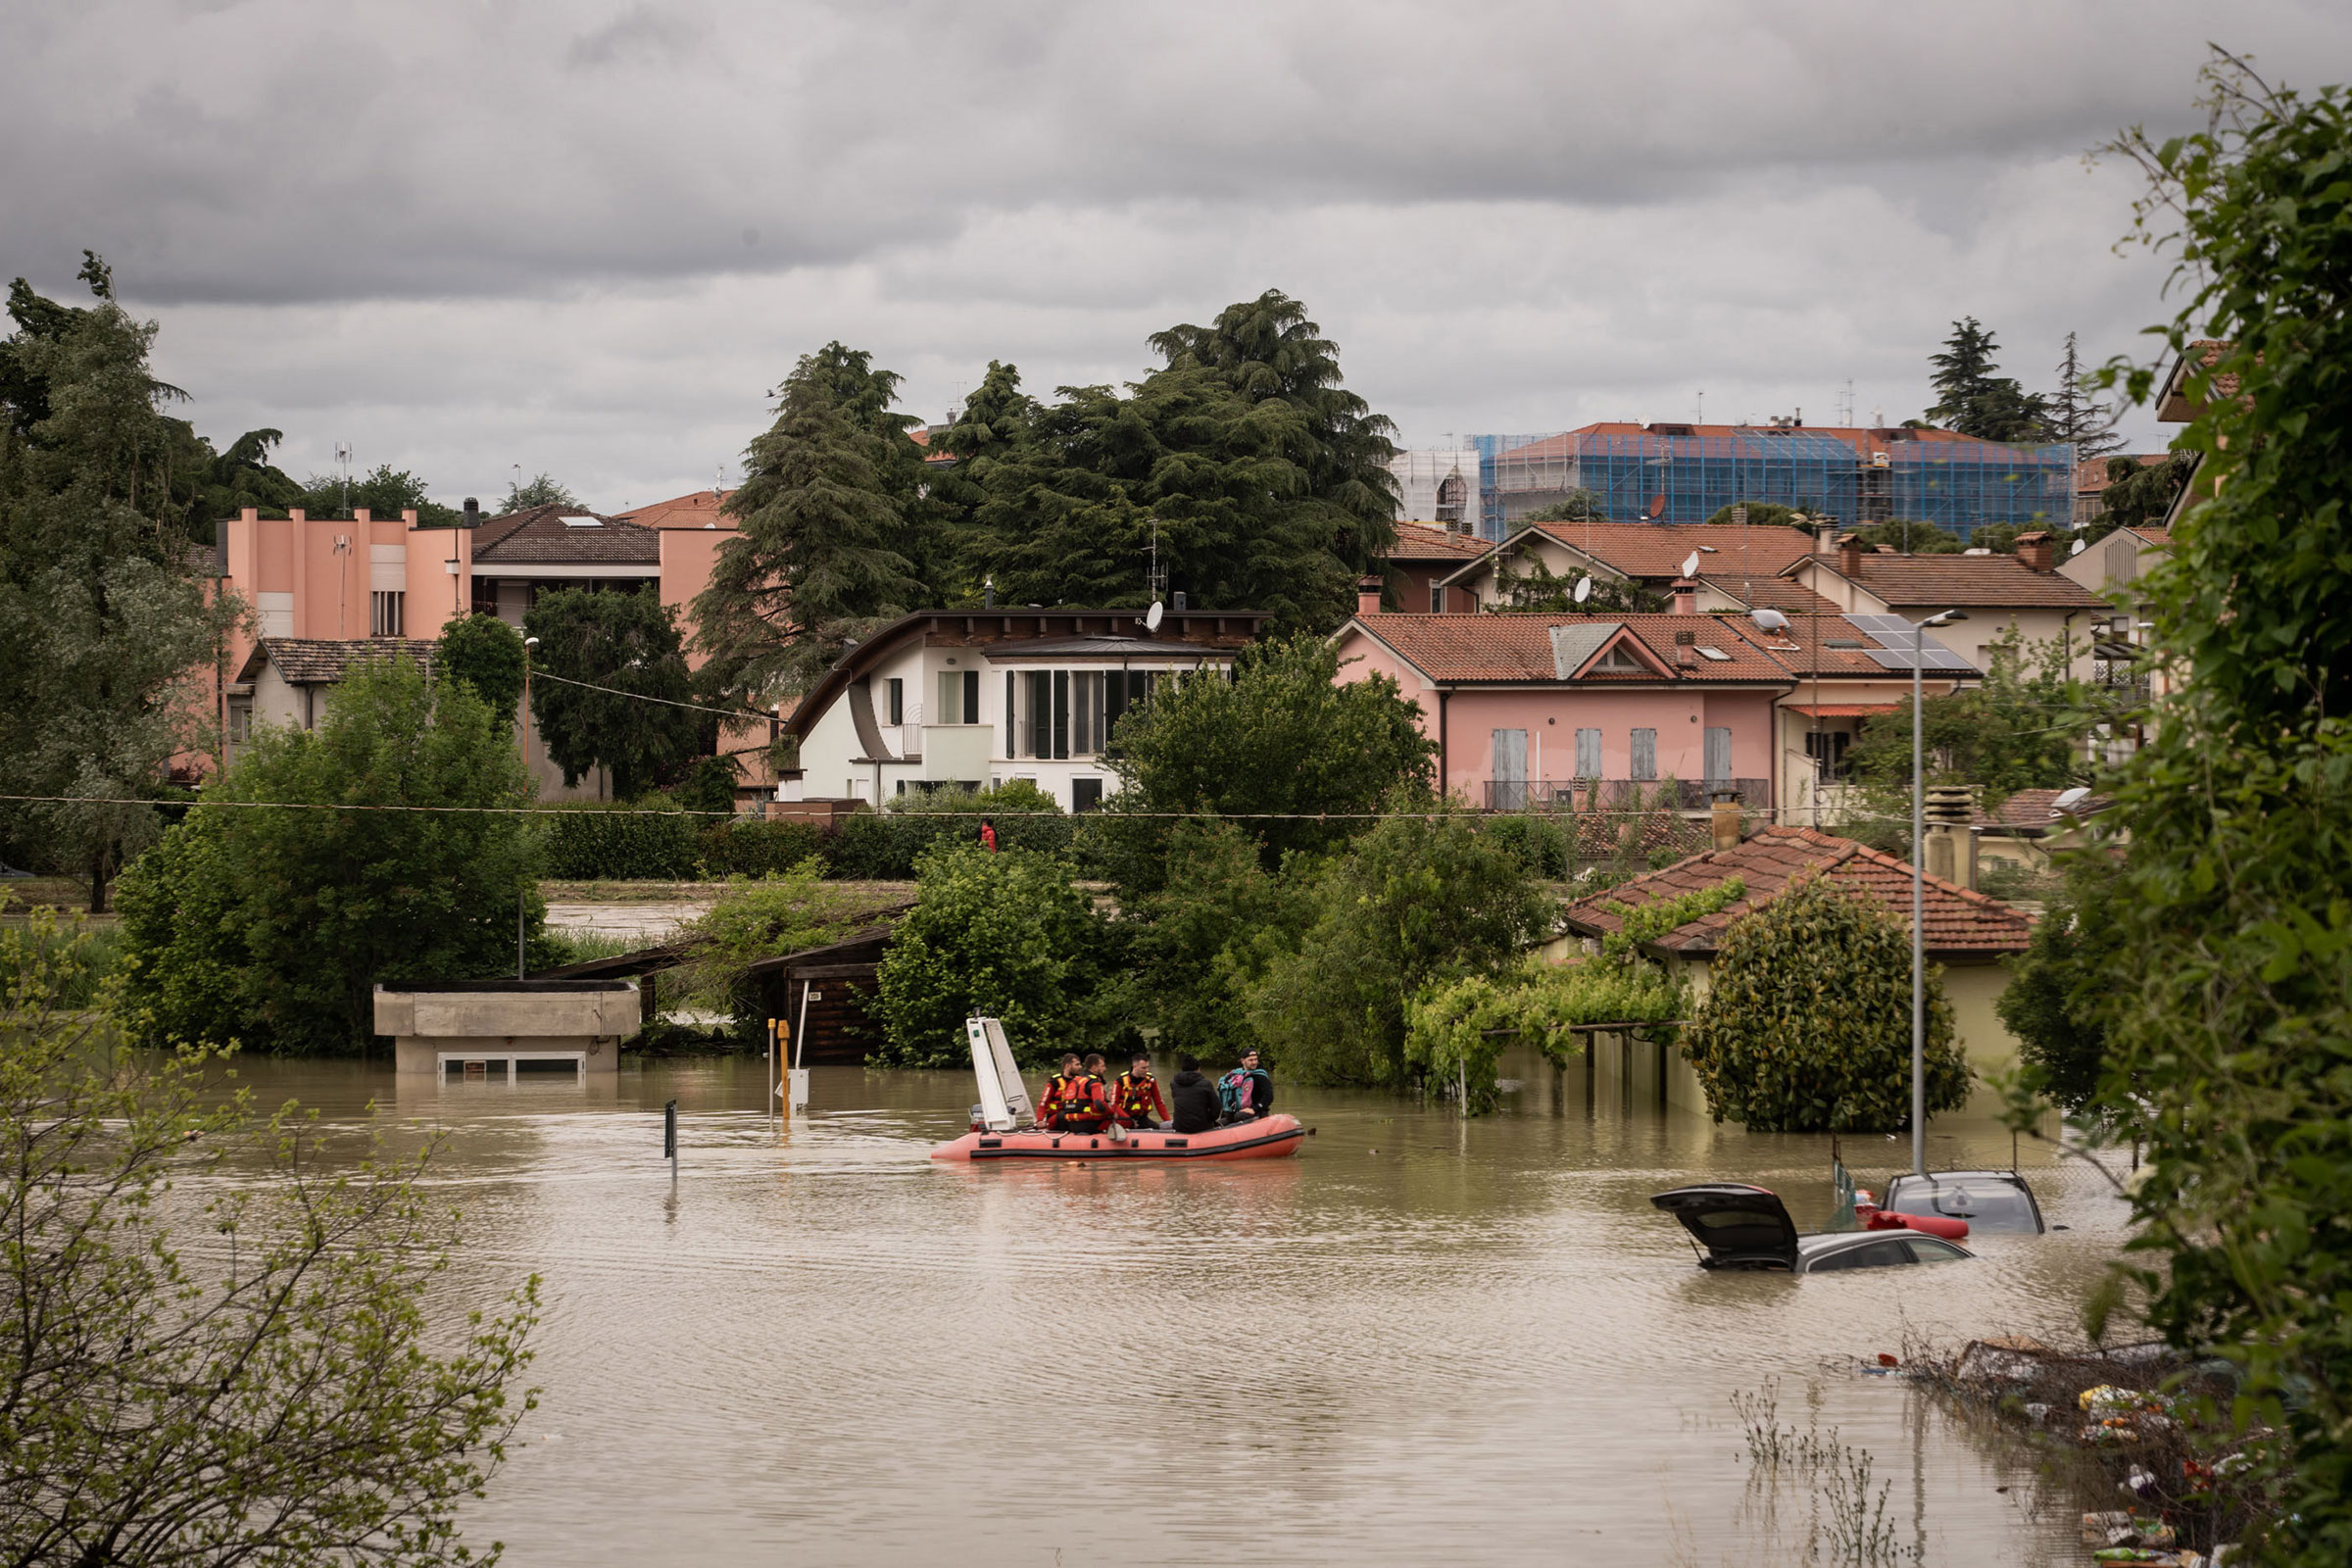 Rescue workers help residents during the flooding in Cesena on May 17. (IPA/Sipa USA/Reuters)